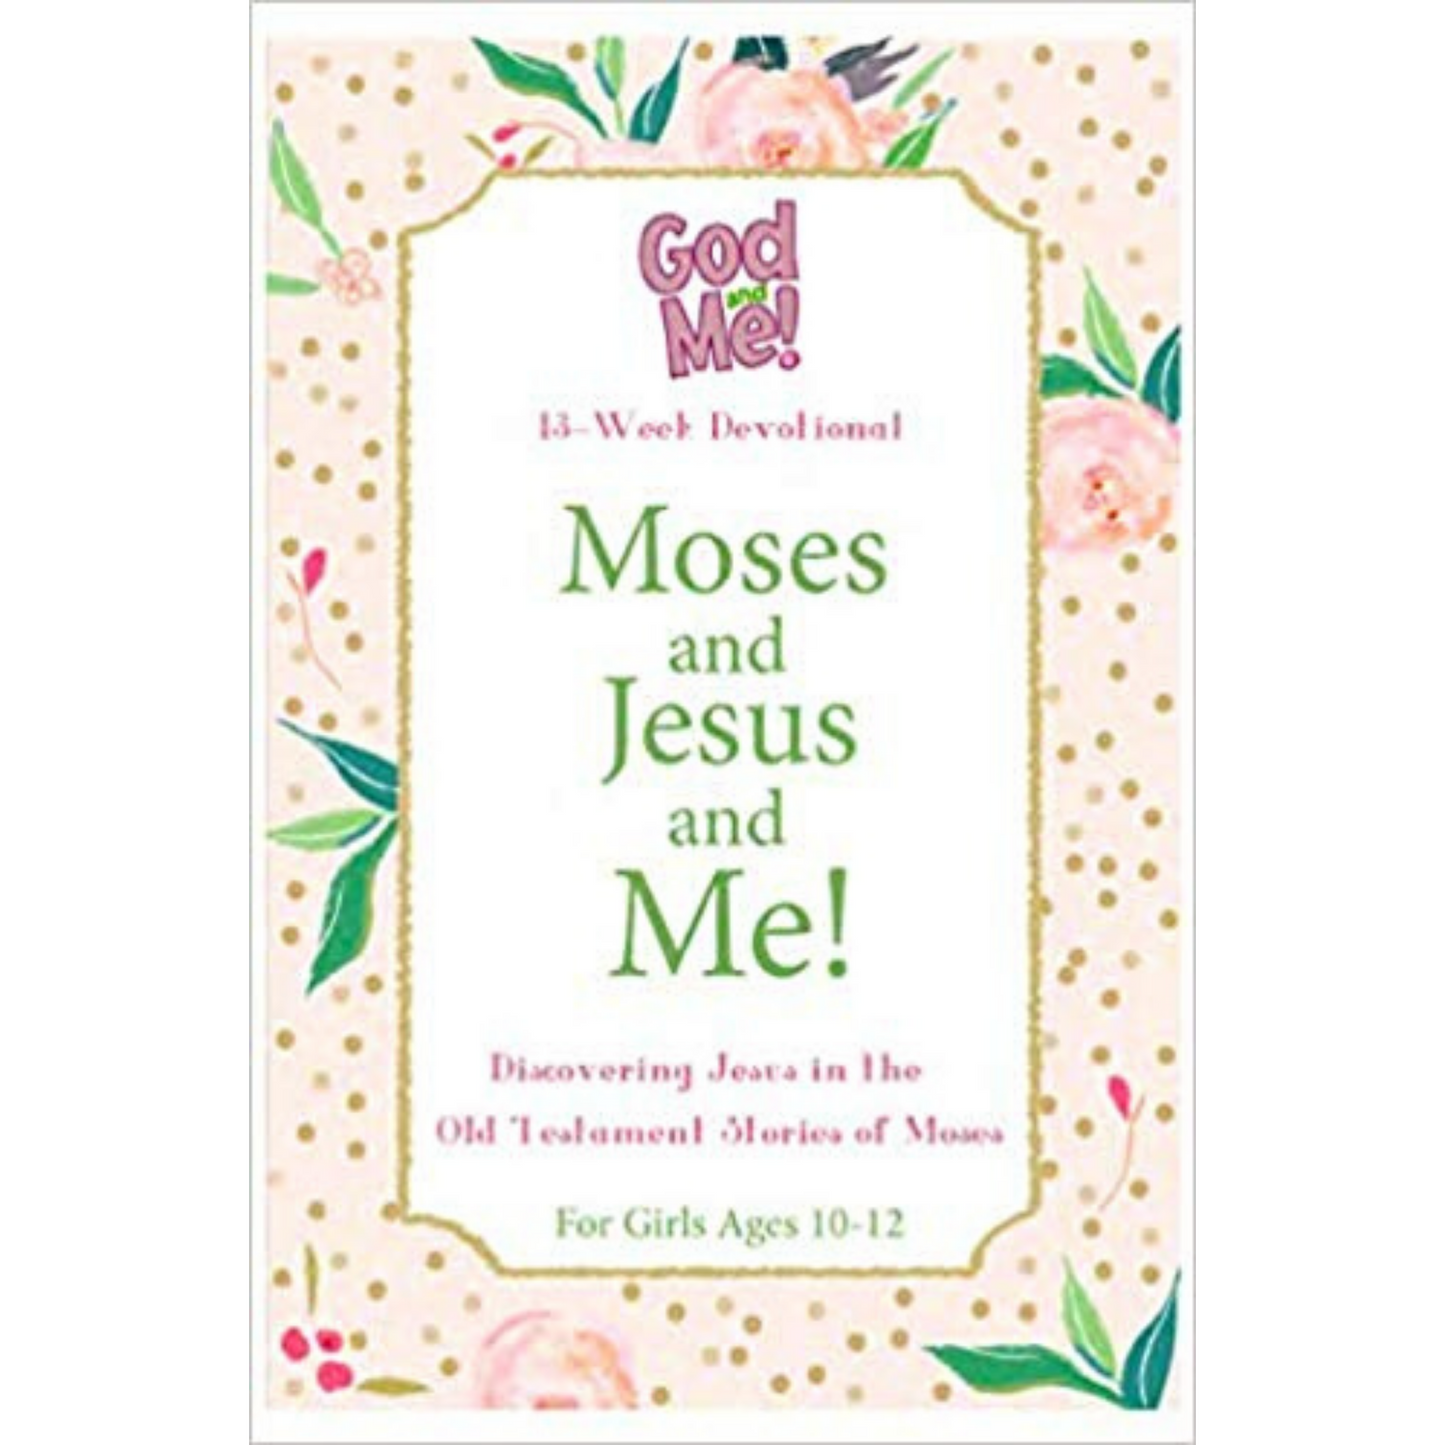 God and Me! Devotional - Moses and Jesus and Me! (For Girls, Ages 10-12)